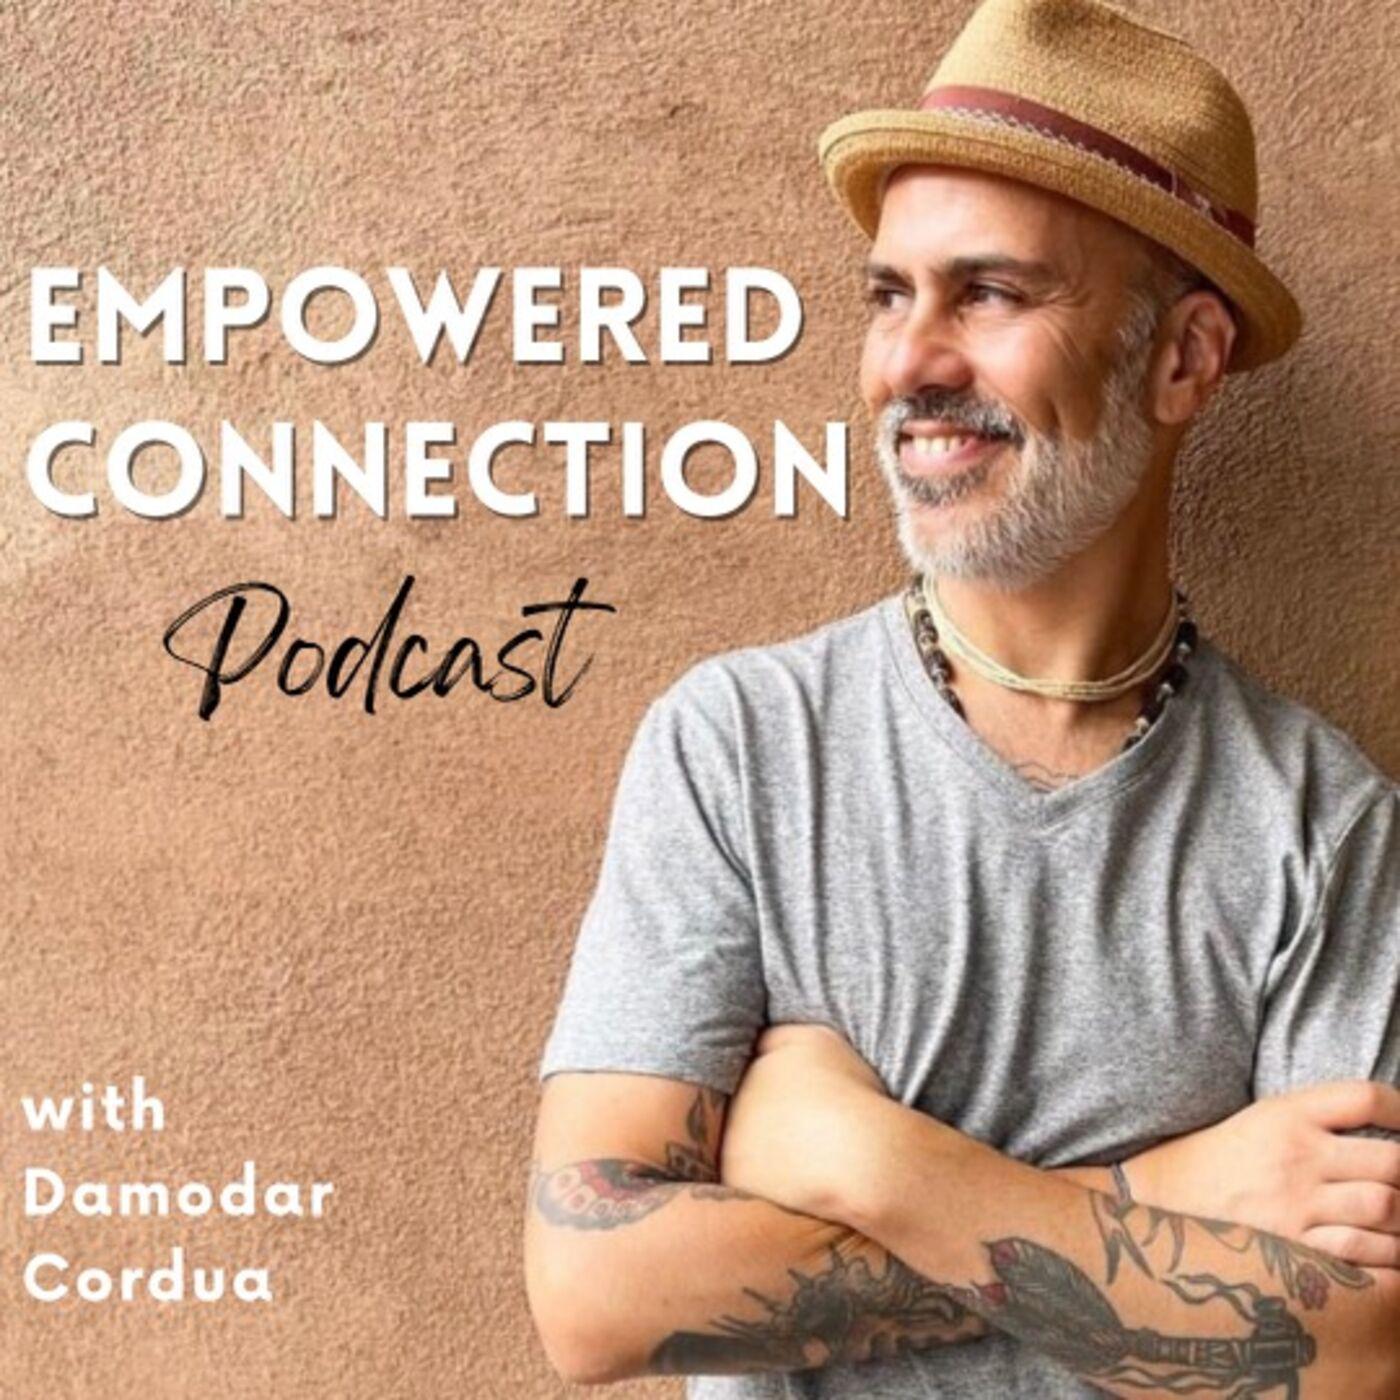 empowered-connection-podcast-p9P6gd8uTMQ-acTnUMvt1u7.1400x1400